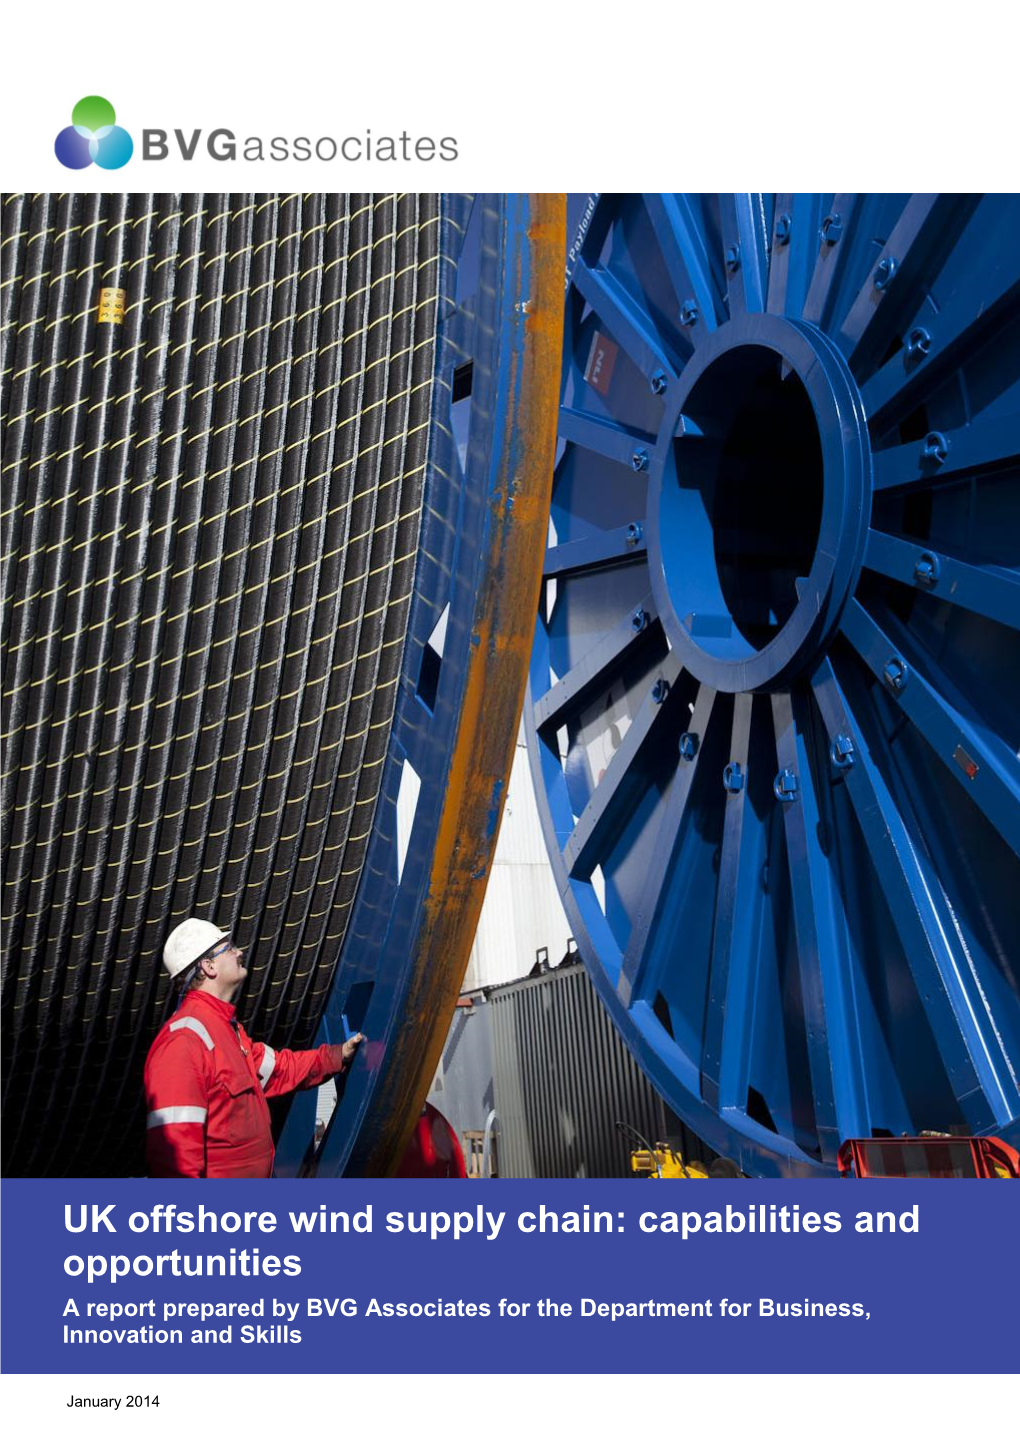 UK Offshore Wind Supply Chain: Capabilities and Opportunities a Report Prepared by BVG Associates for the Department for Business, Innovation and Skills Subtitle